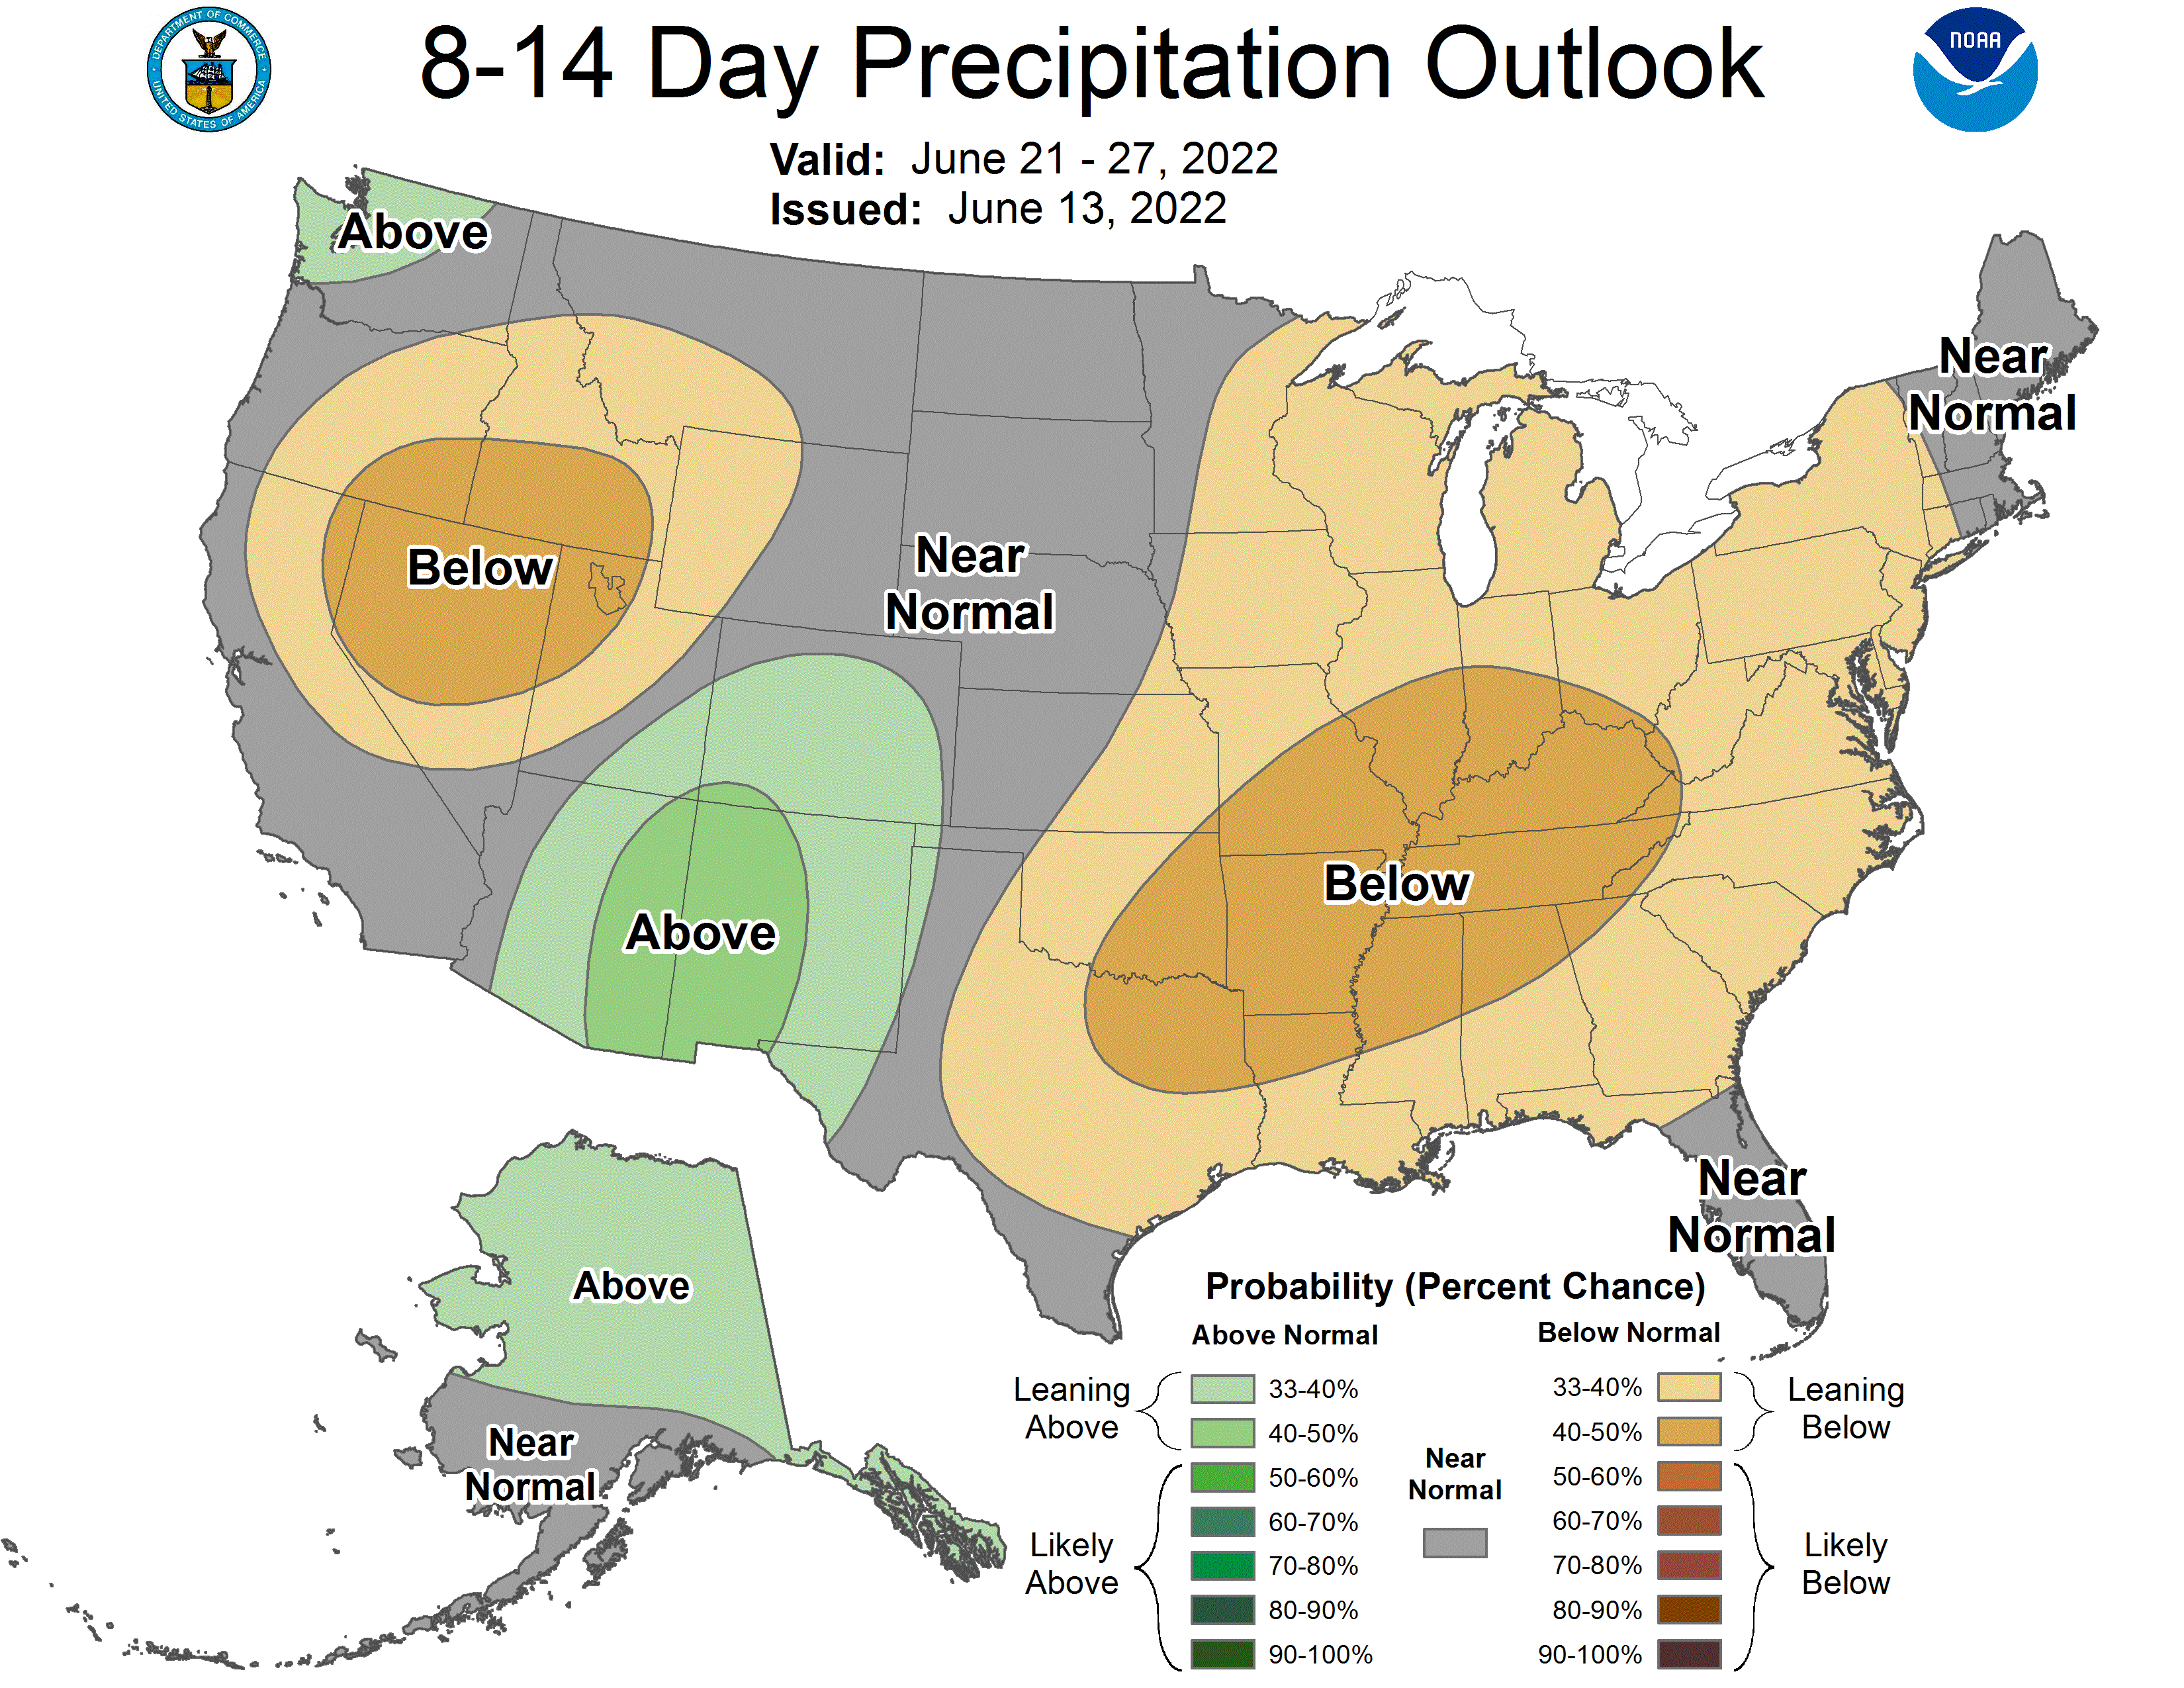 Climate Prediction Center - 8 to 14 Day Outlooks